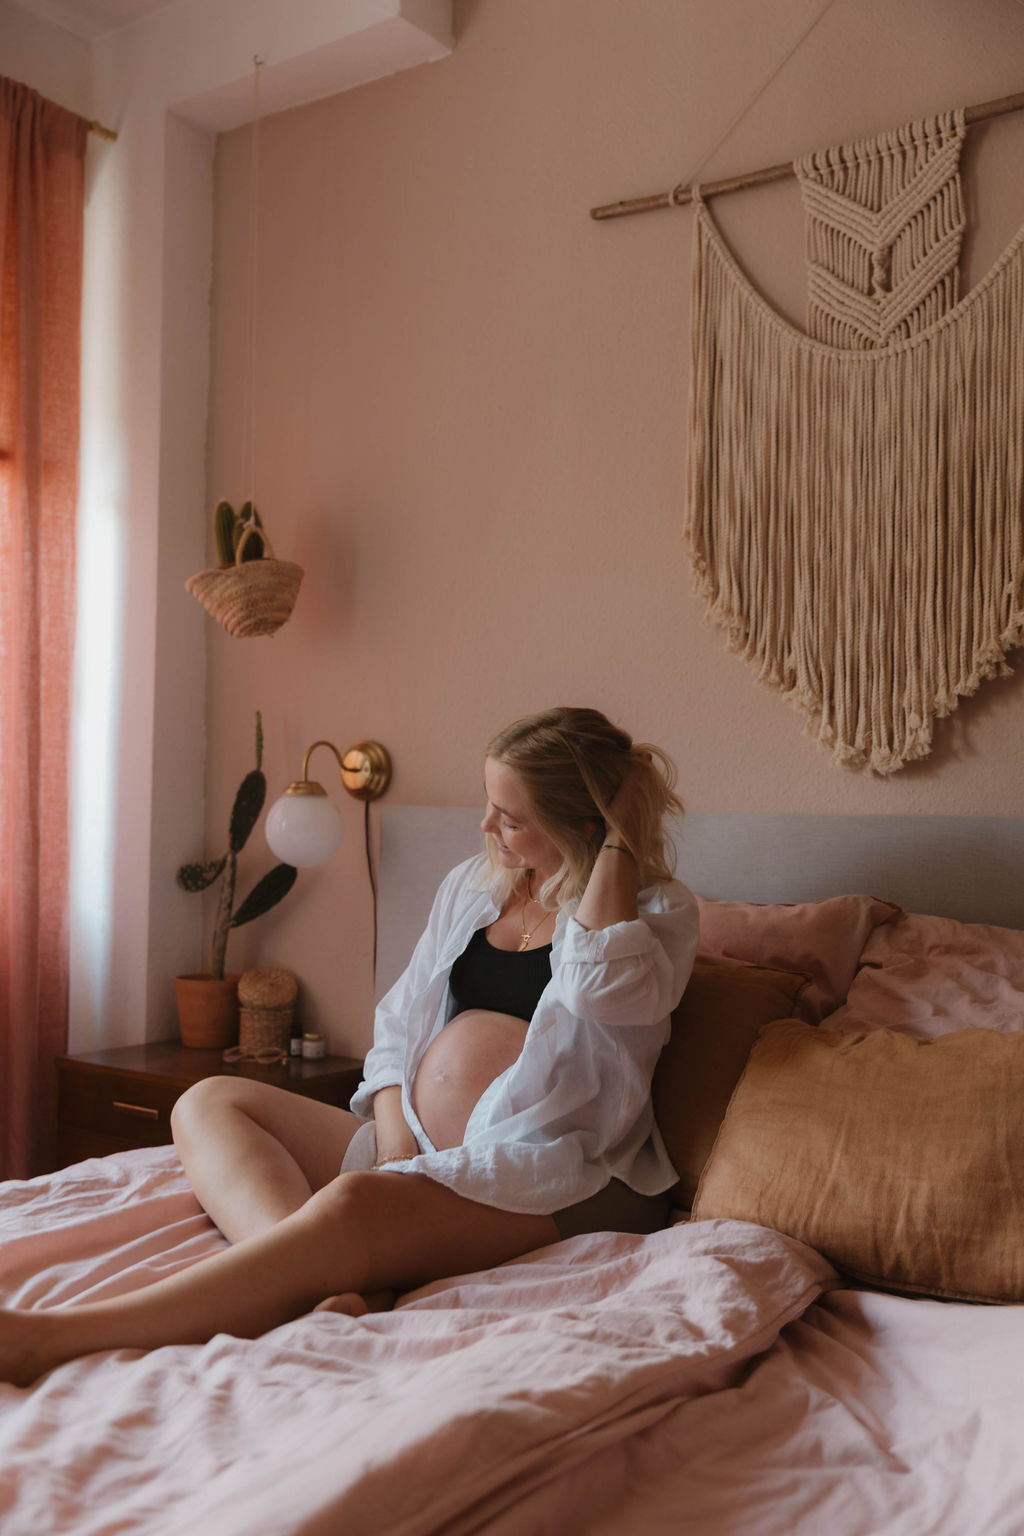 pregnant woman sitting on a bed wearing shorts a bra and an open shirt showing her pregnant belly